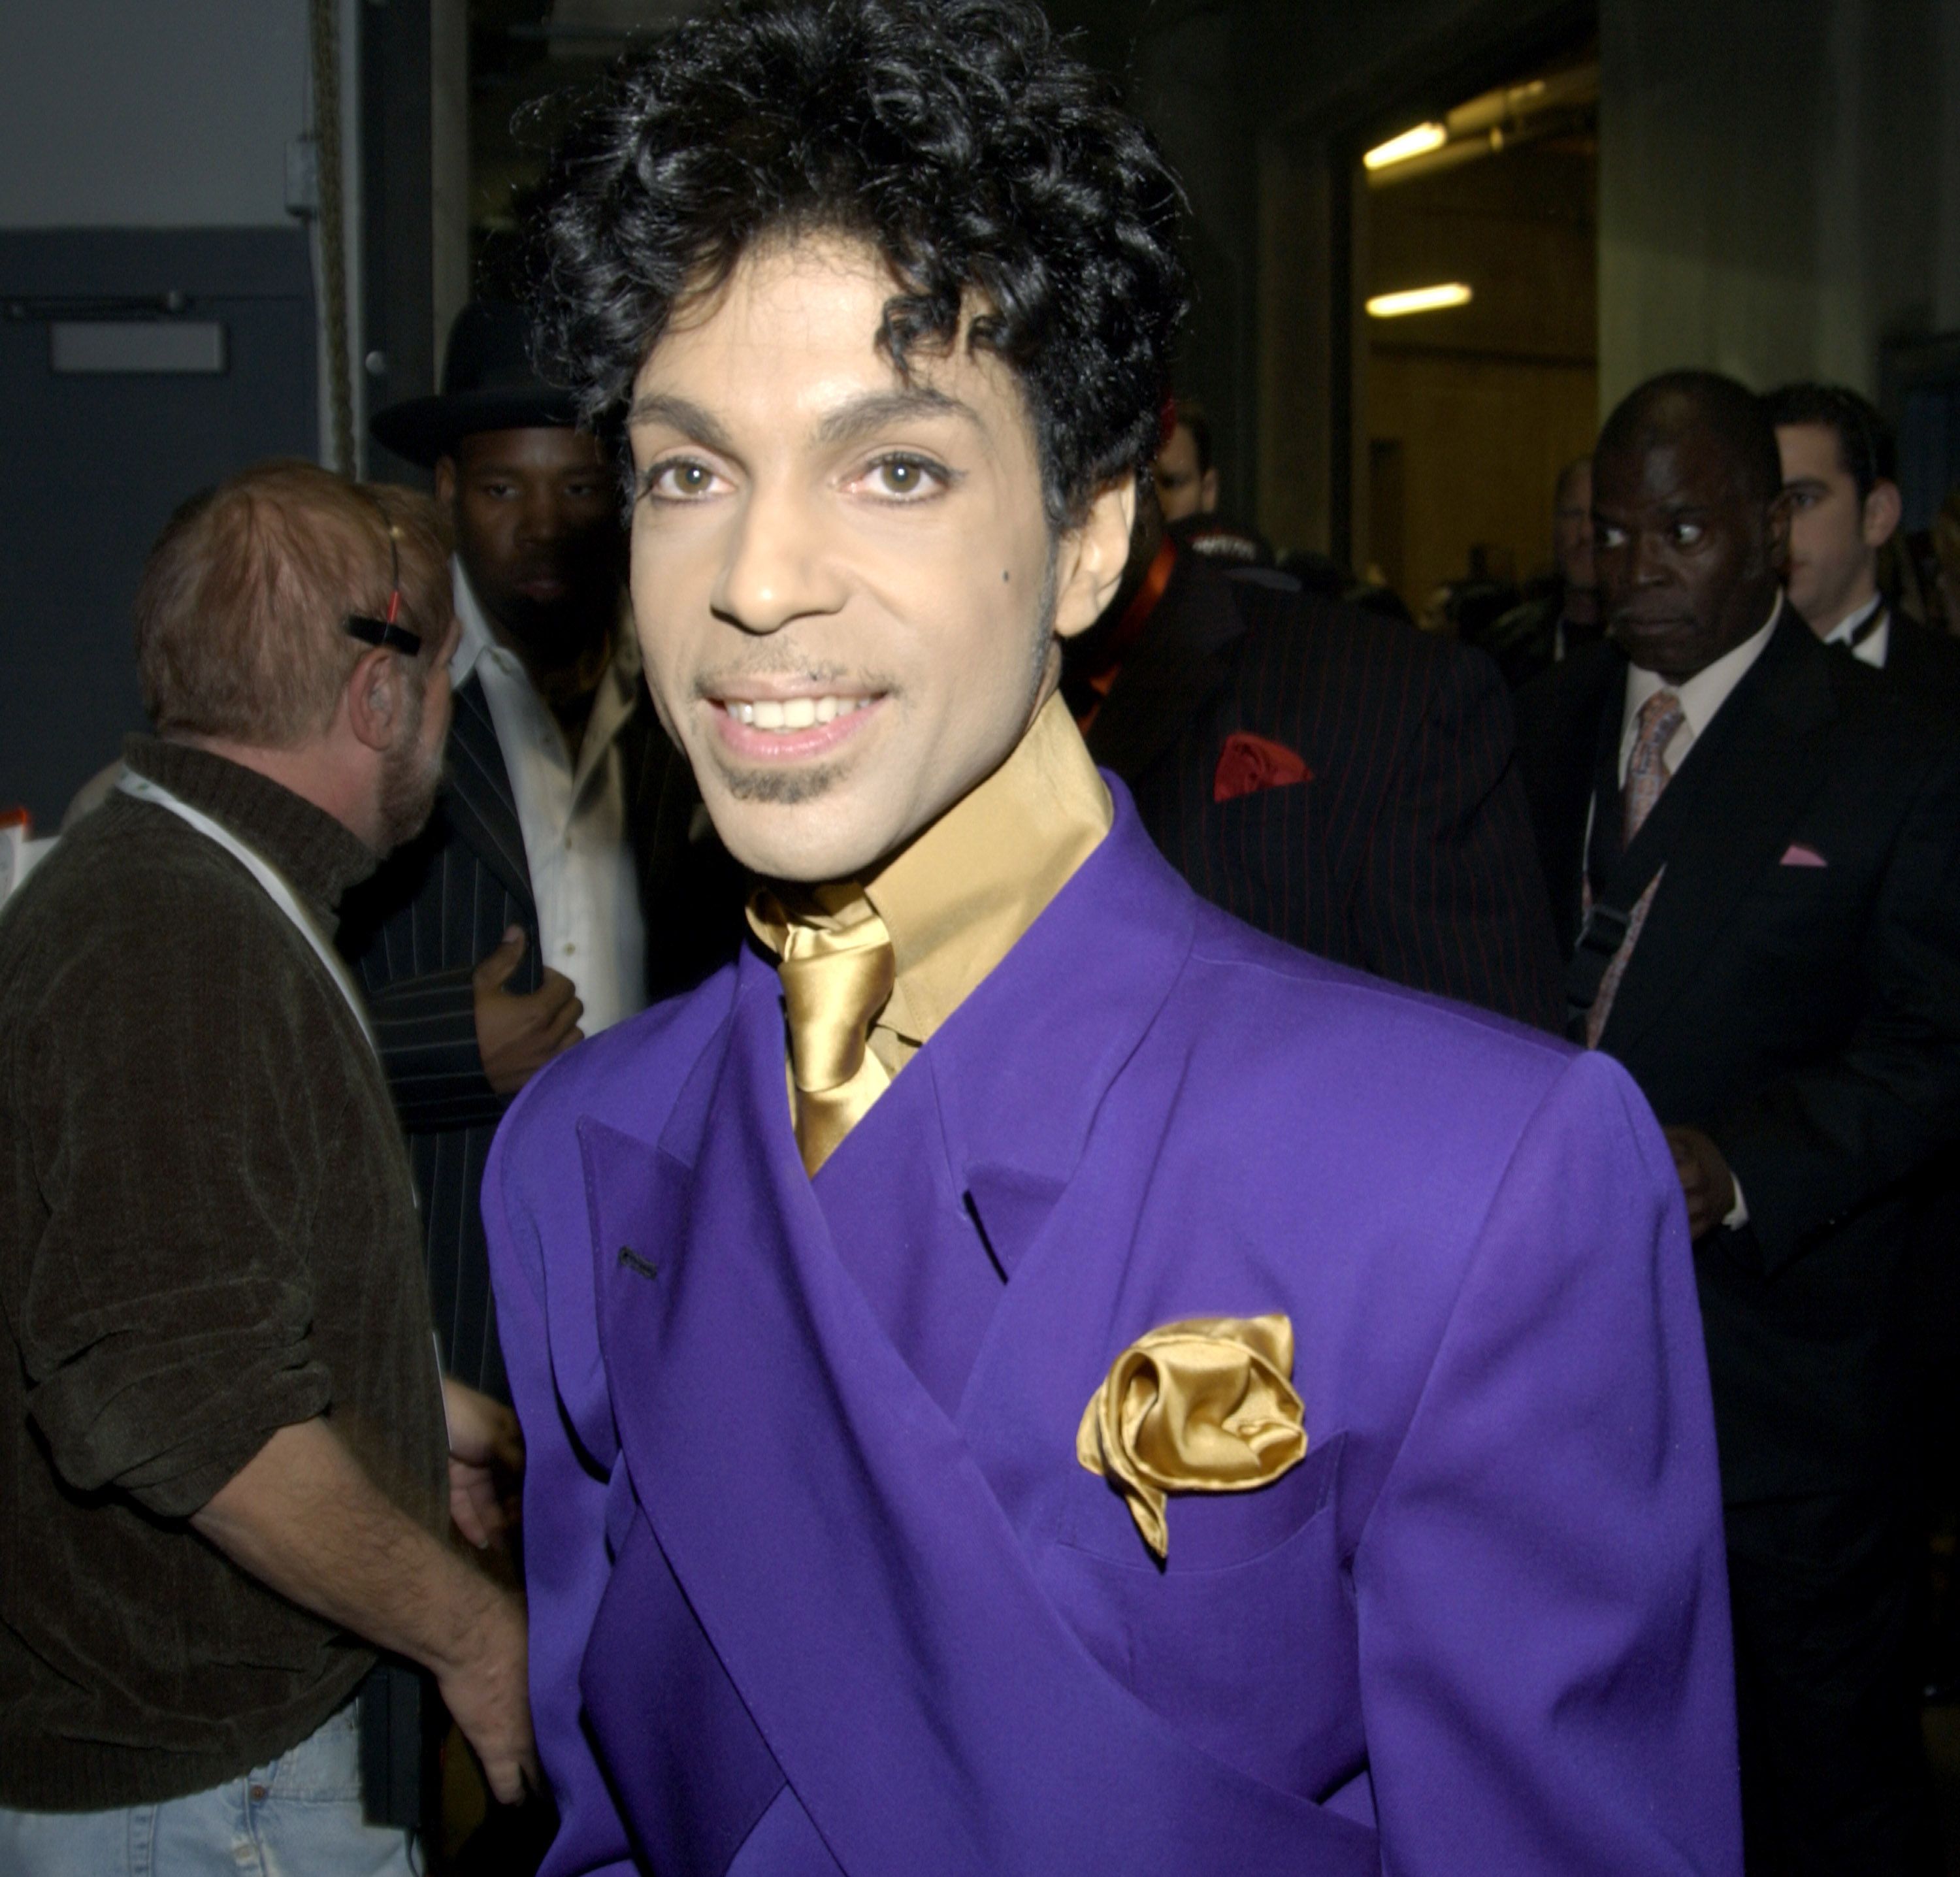 Prince at The 46th Annual GRAMMY Awards - Backstage | Photo: Getty Images